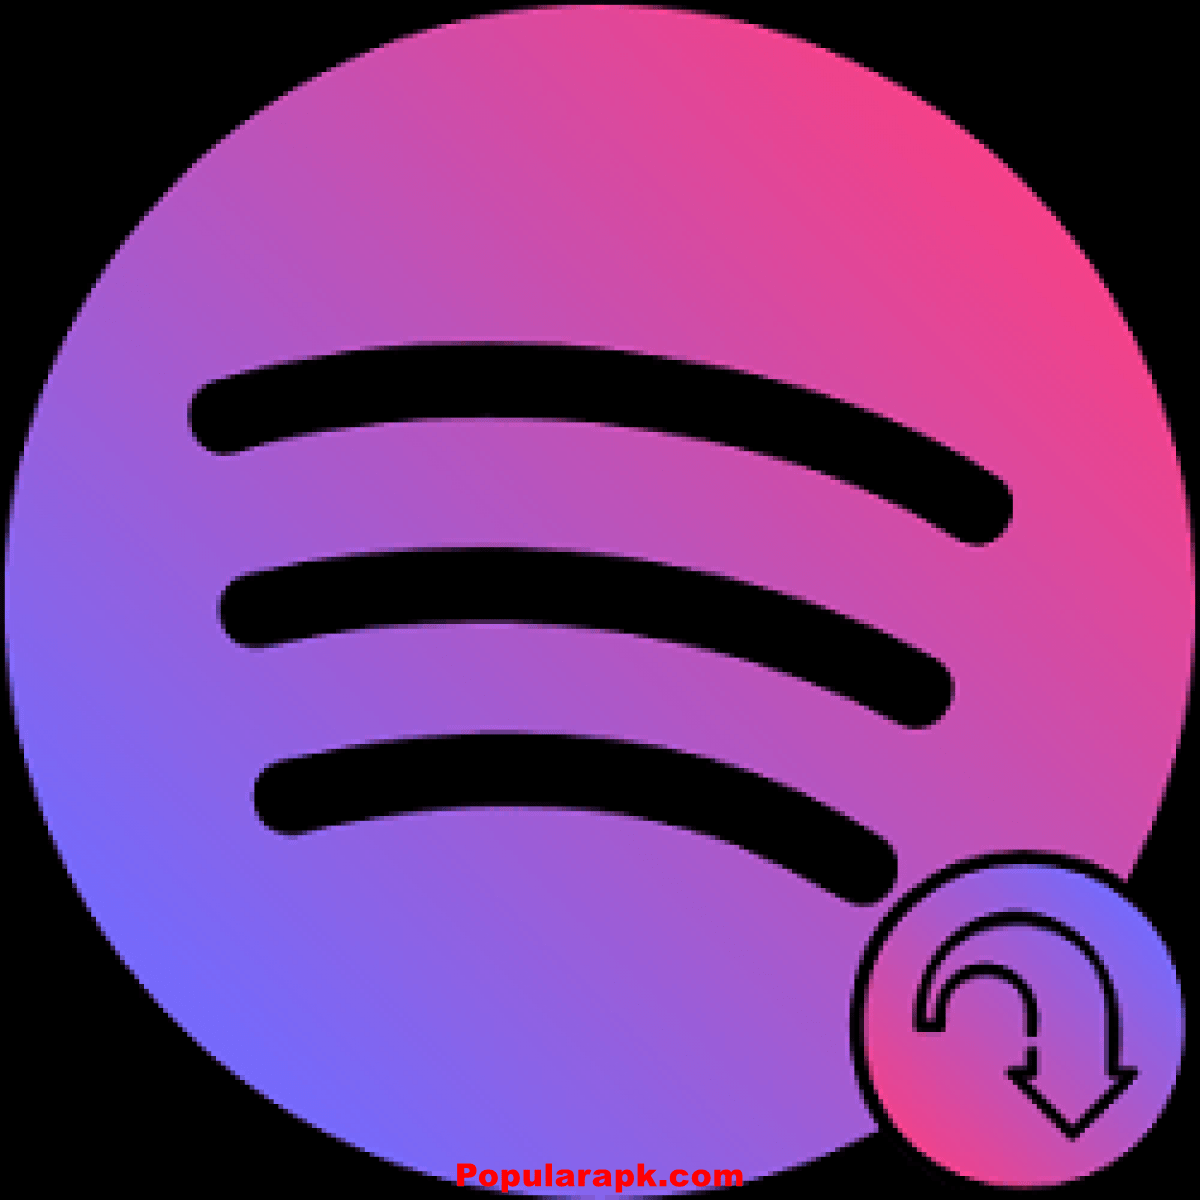 Spotiflyer Apk V3.6.3 AdFree Spotify For Android Phones